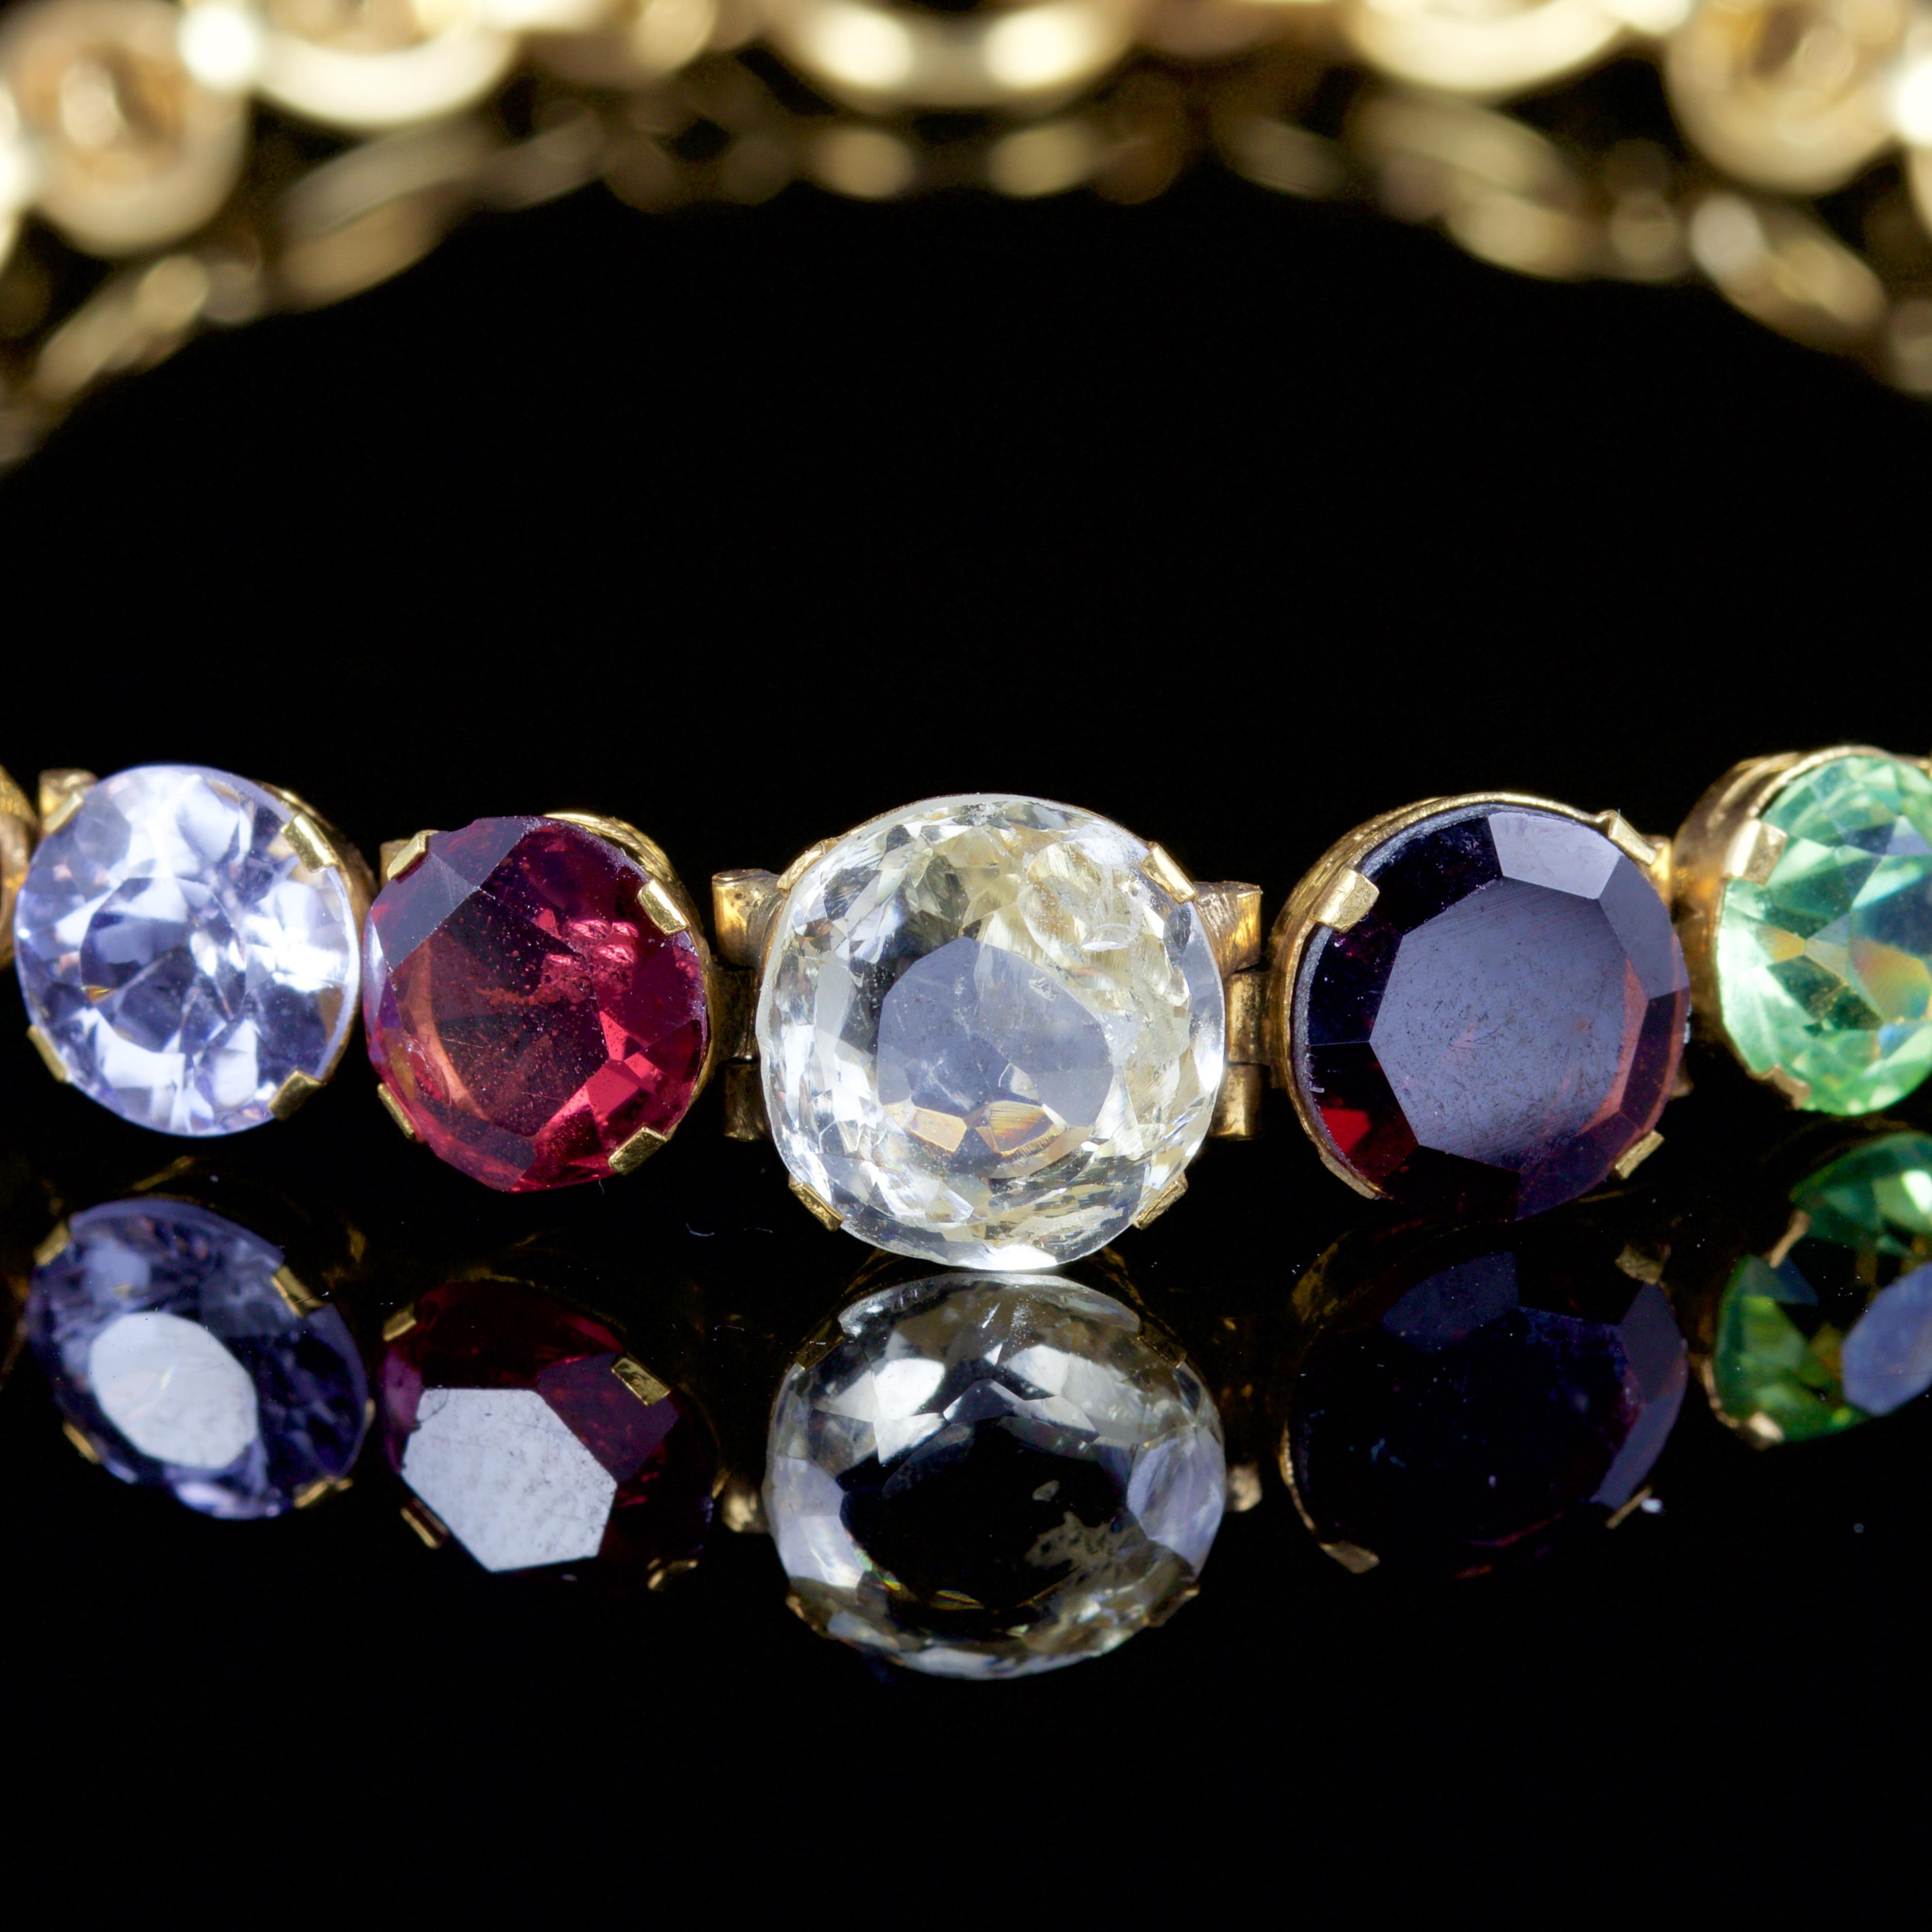 This genuine Victorian multi-gemstone bracelet is, Circa 1880.

The gemstones comprise of a White and Yellow Sapphire, Garnet, Peridot, Citrine and a green Garnet, it is a beautiful combination of gemstones.

Sapphire is the symbol of feelings of